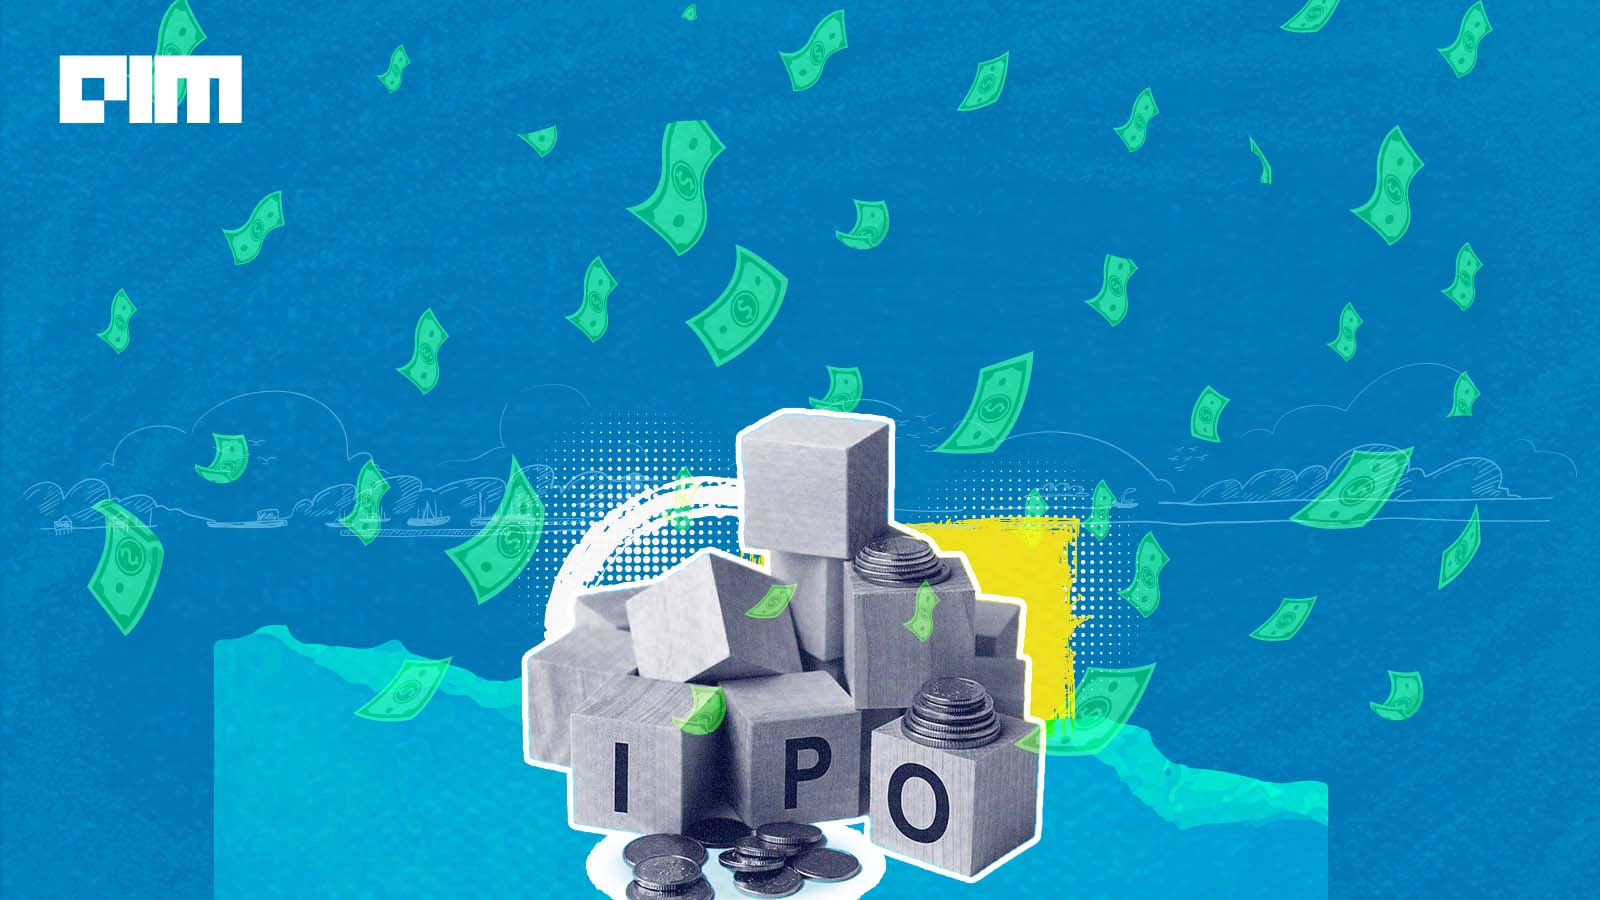 Why is it raining IPOs in the analytics space?